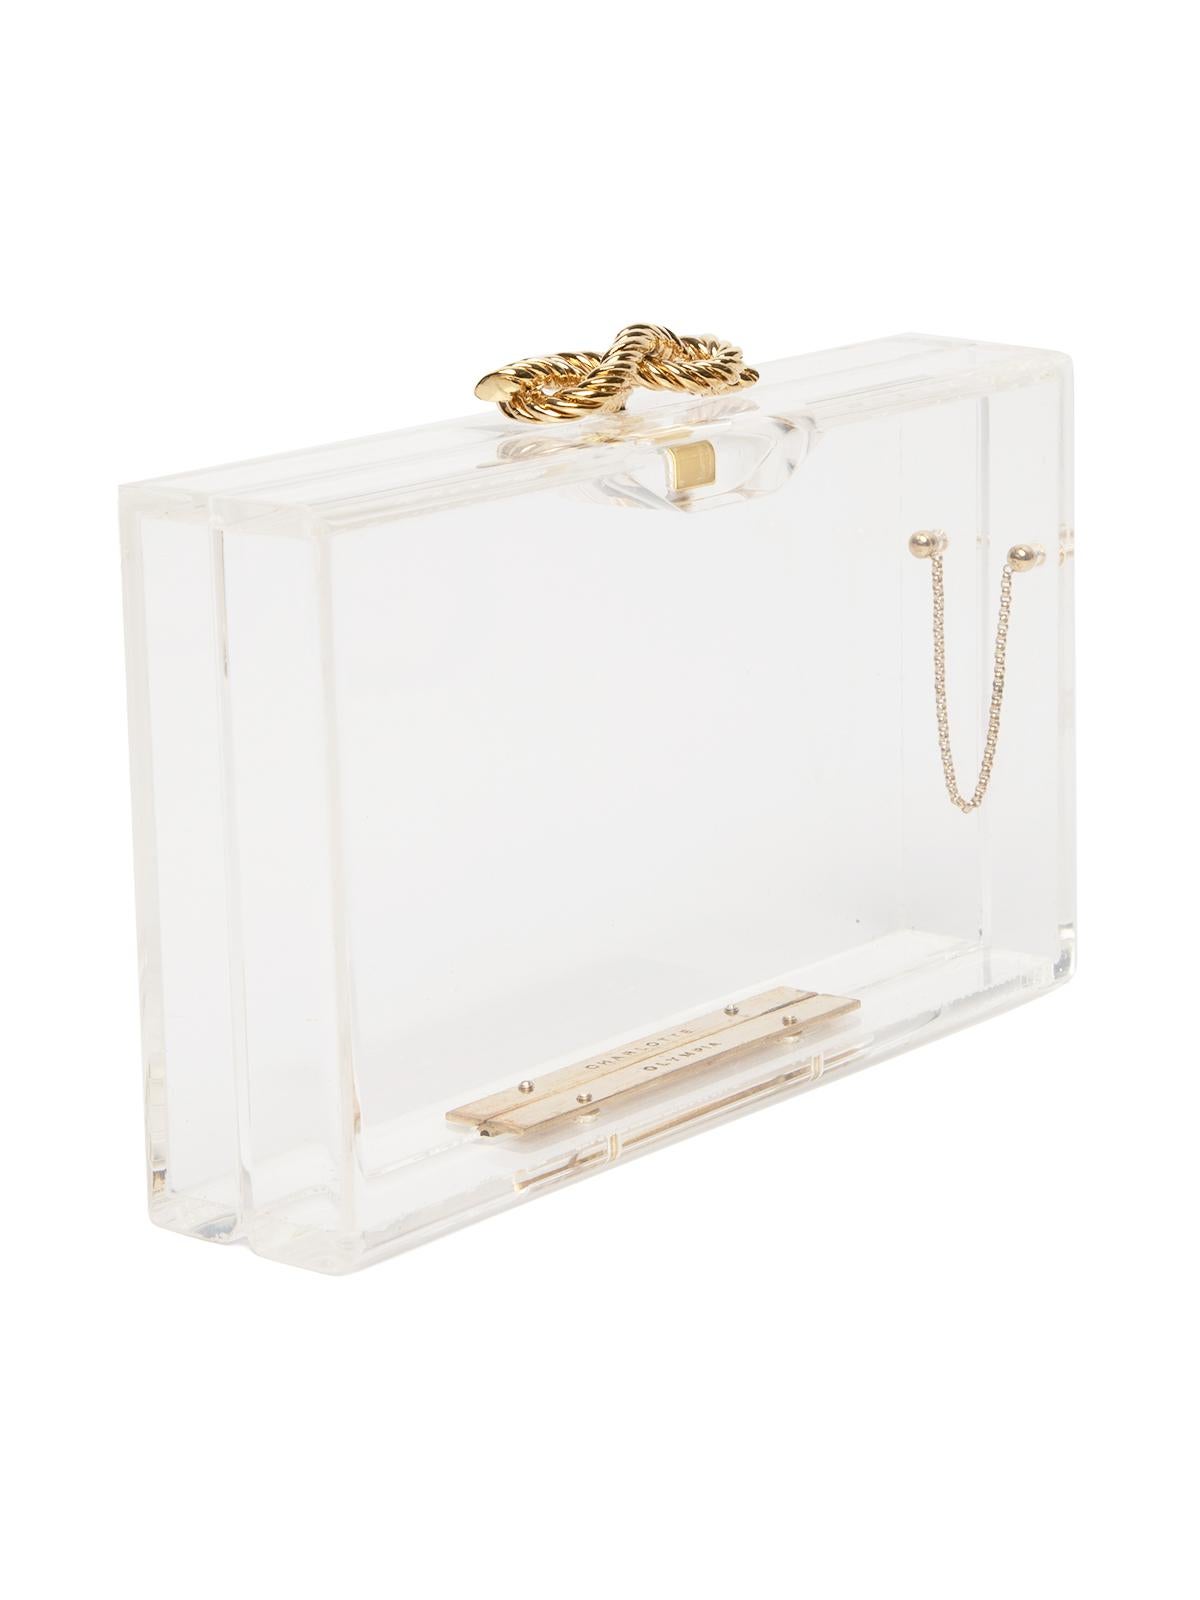 CONDITION is Good. Some wear to clutch is evident. Slightly visible scratches to interior & exterior, and discolouration to gold metal hardware on this used Charlotte Olympia designer resale item. Details Clear Perspex Clutch Gold metal hardware